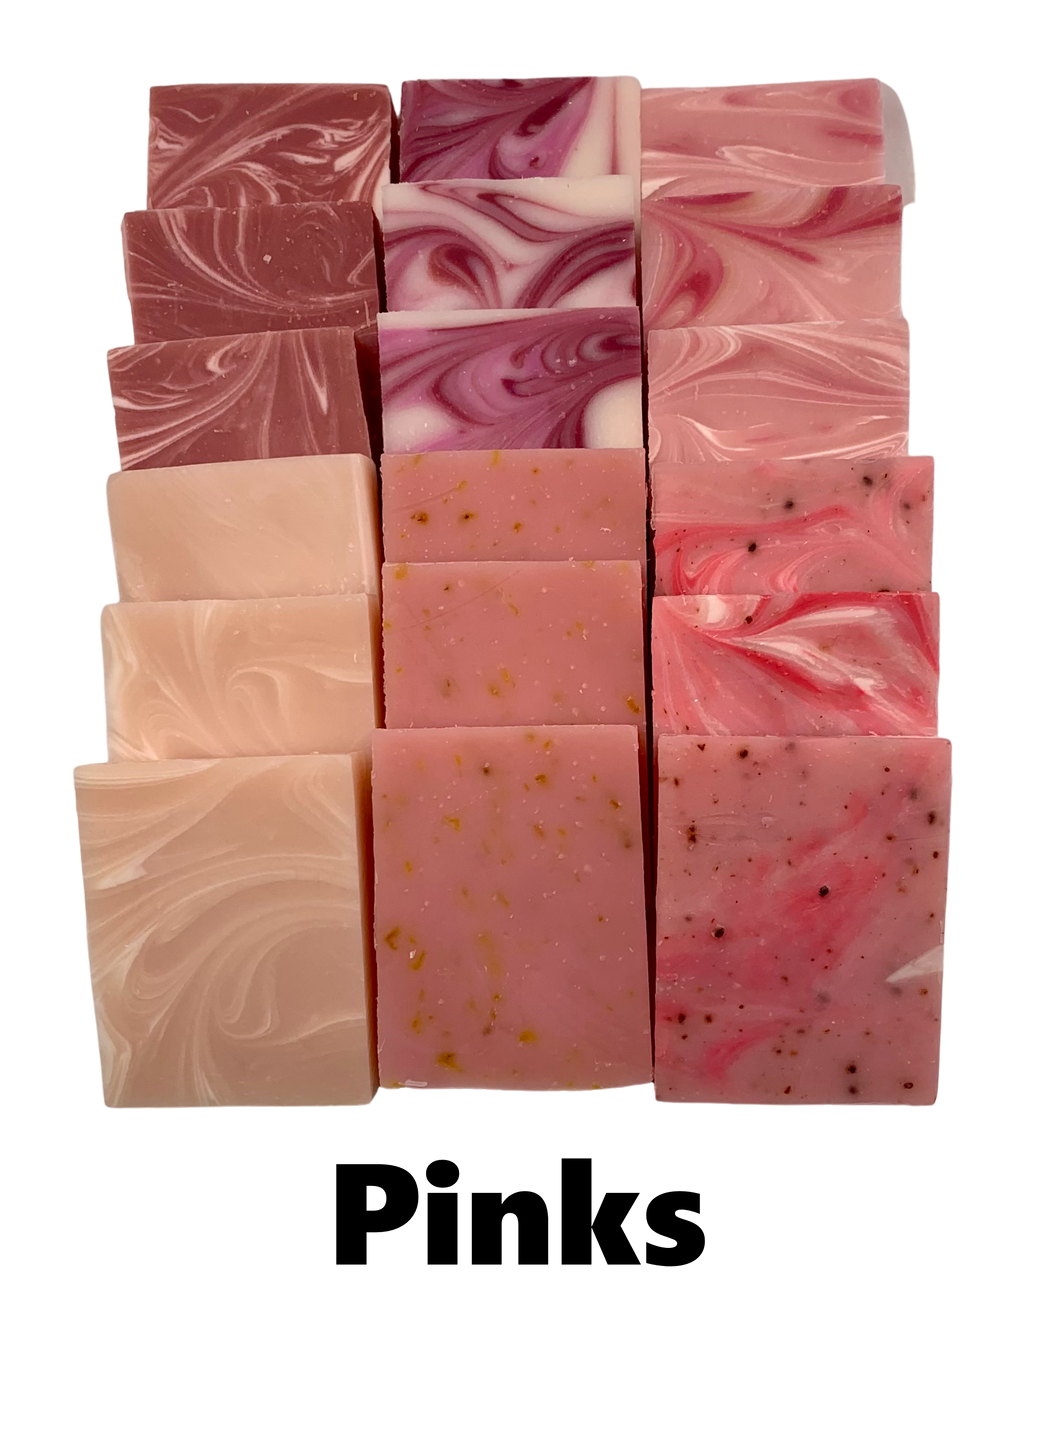 60 Unwrapped mini soaps - assorted or your choice of colors